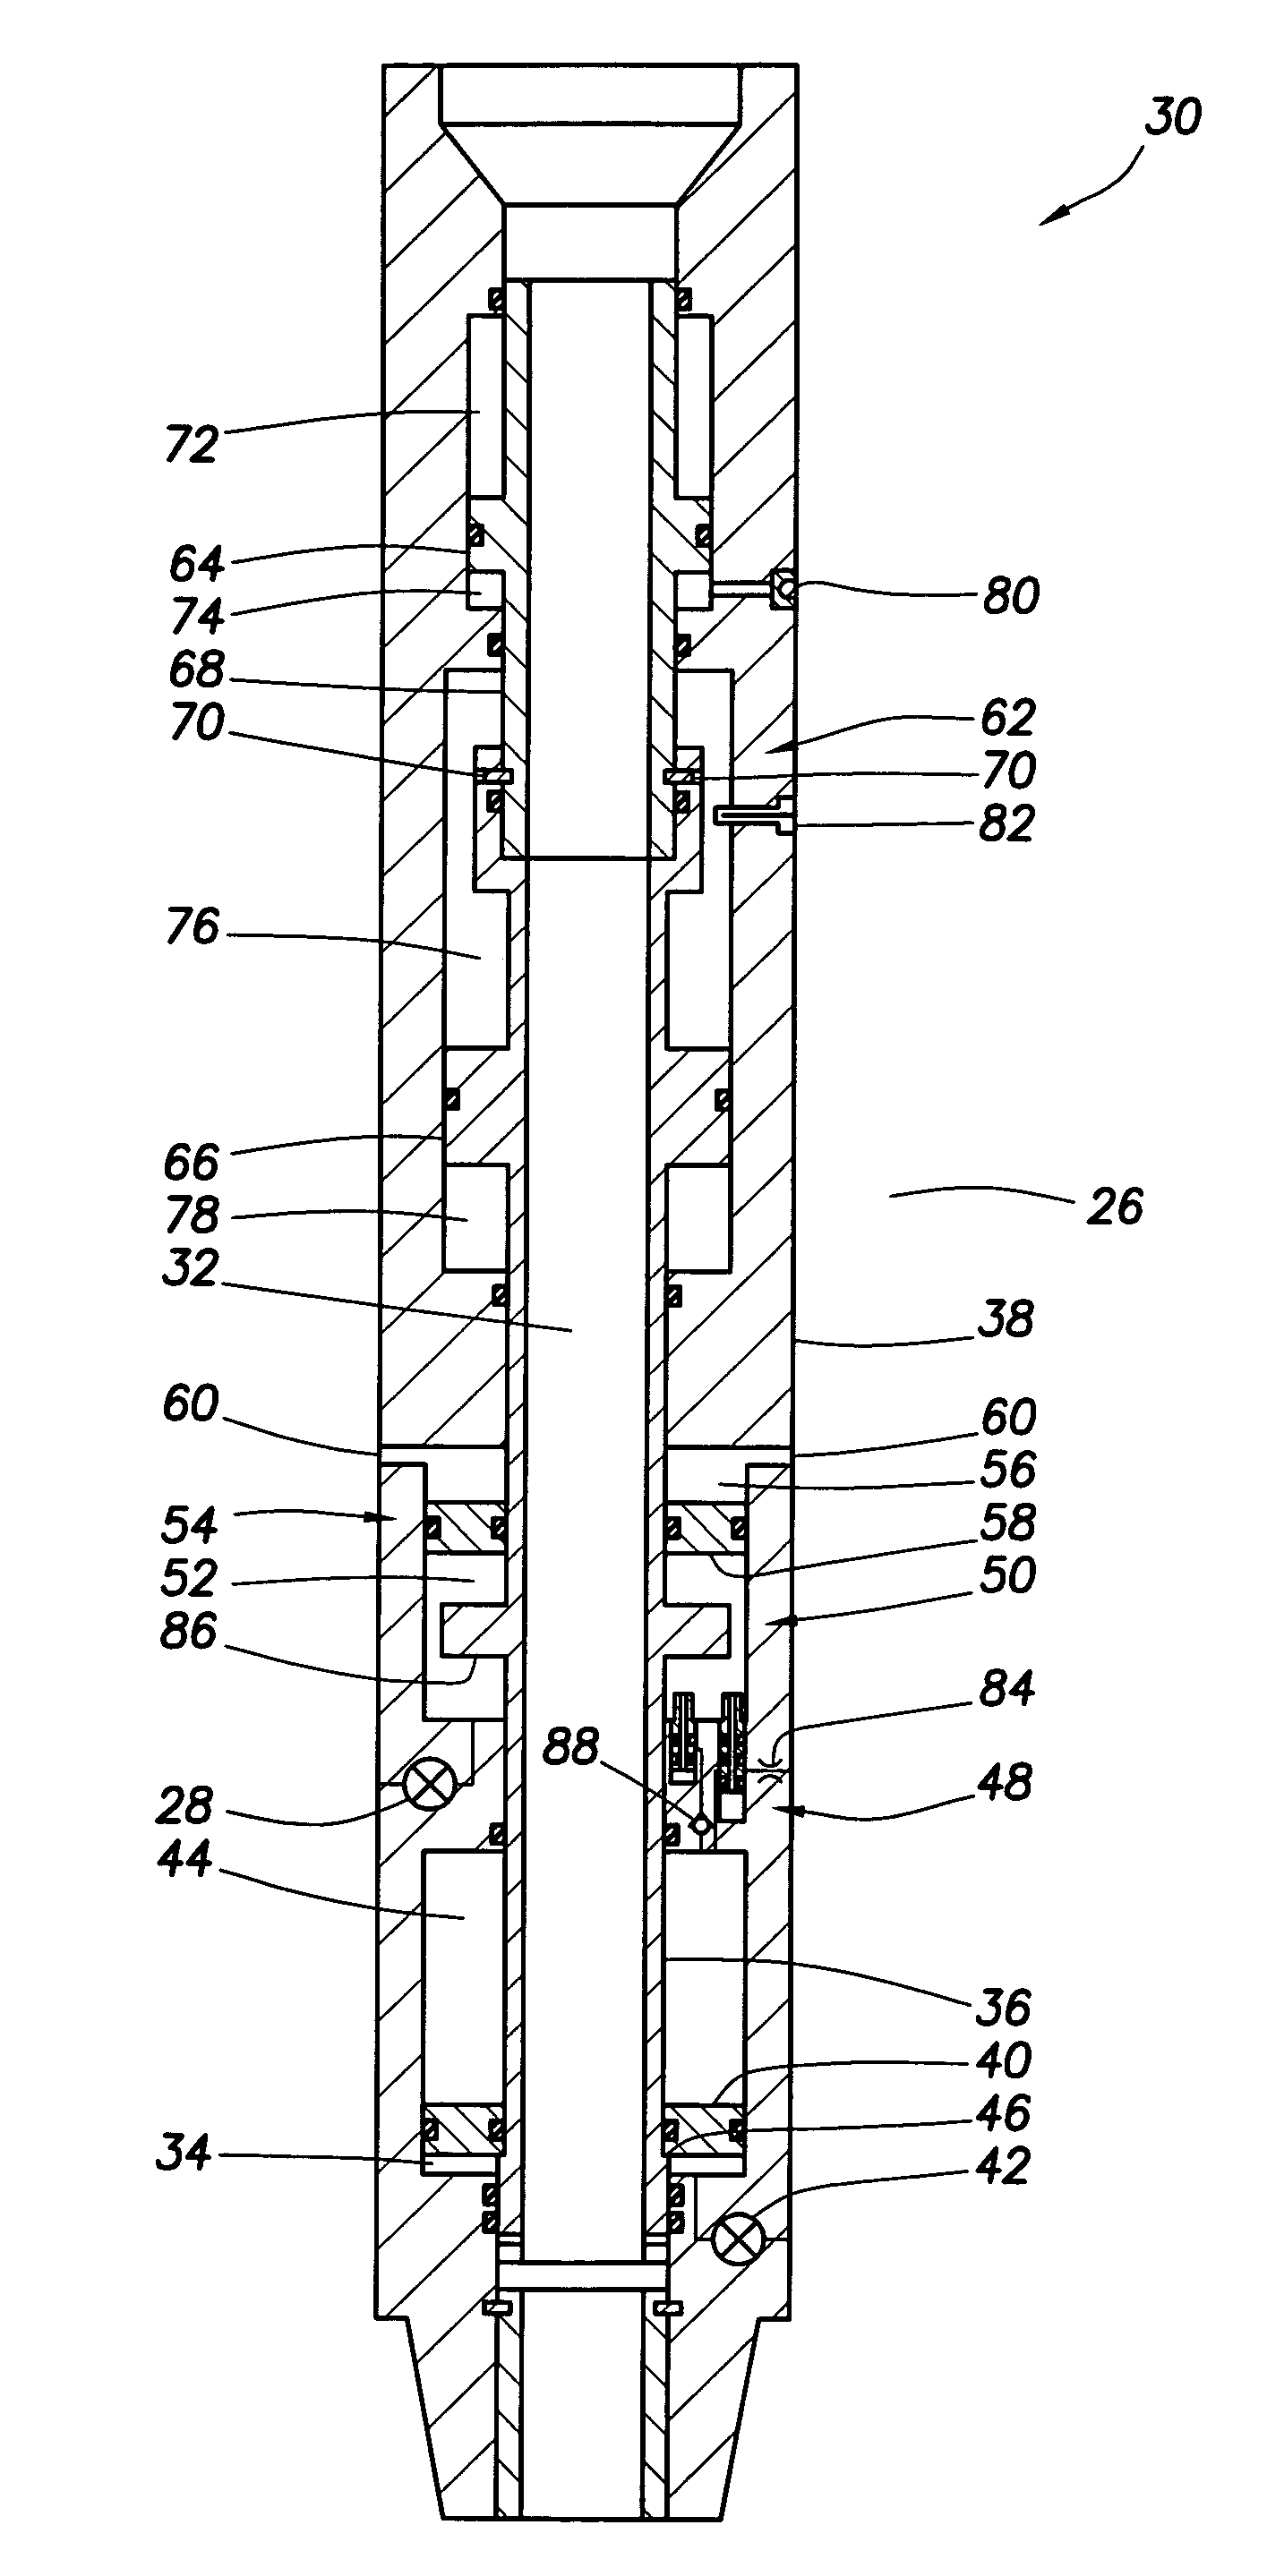 Single phase fluid sampler systems and associated methods